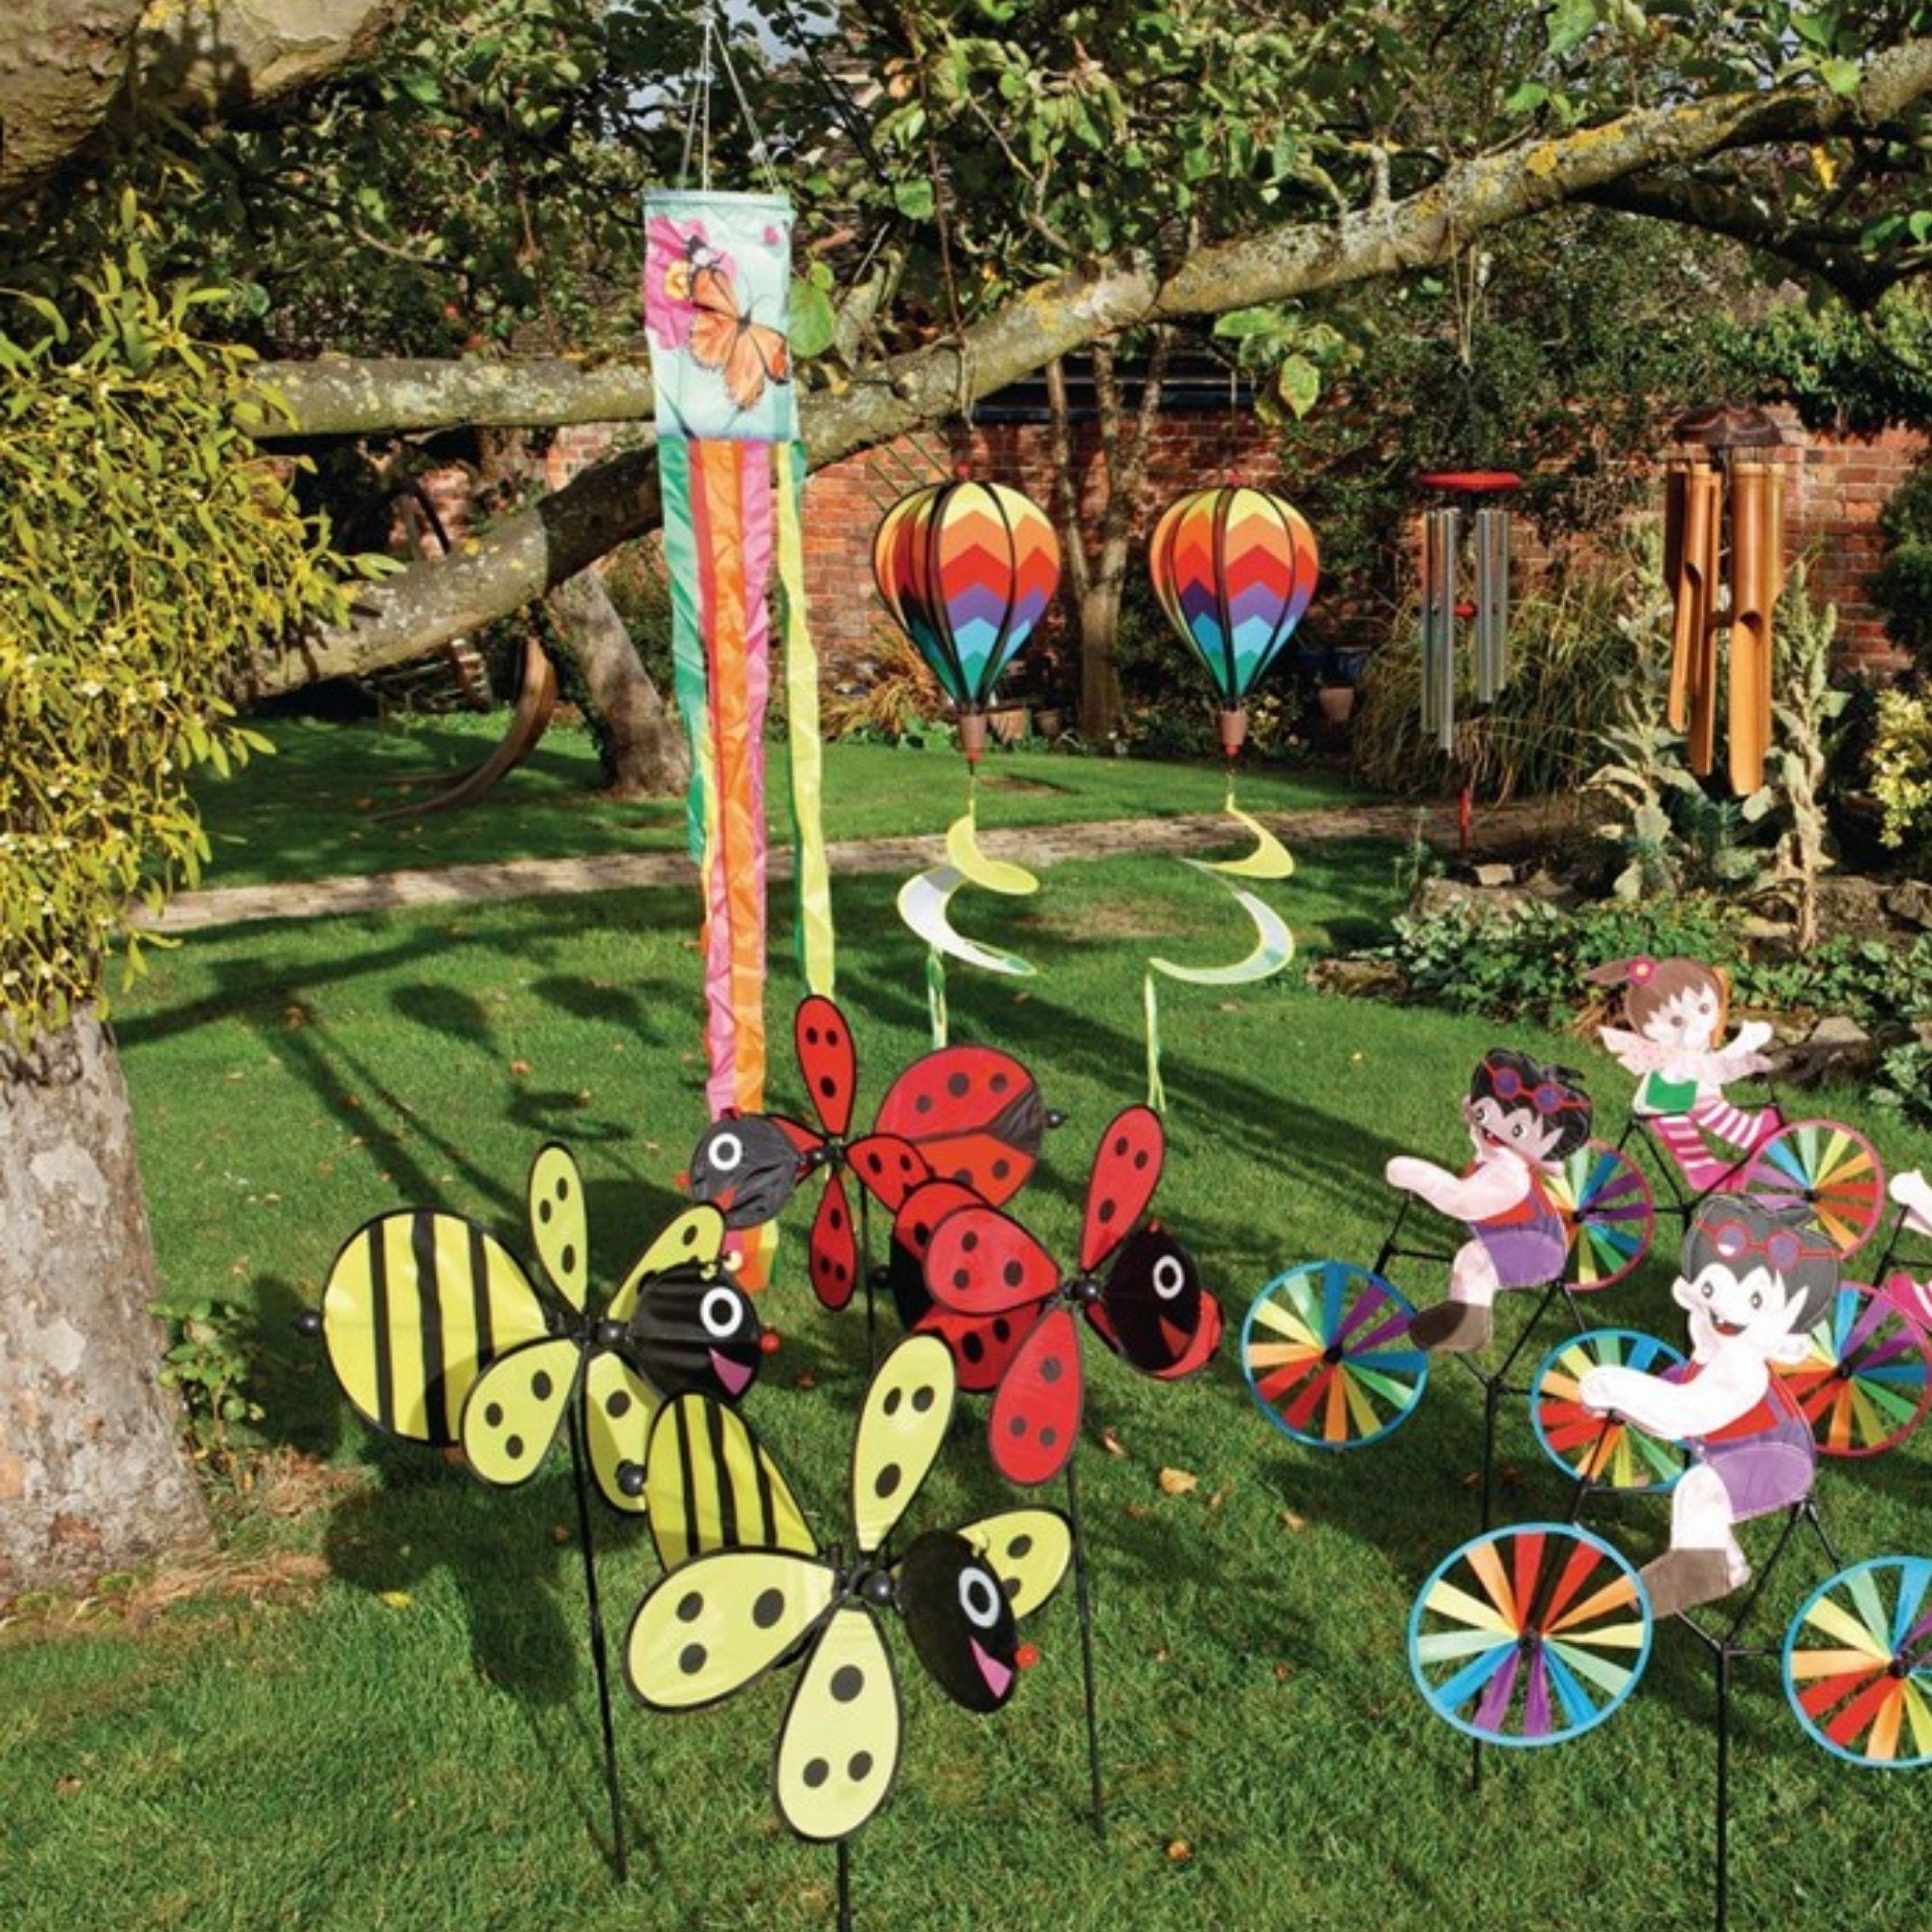 20 Piece Playground Windmill Sensory Set, Introducing the delightful Windy Playground Windmill Sensory Set, a comprehensive collection that brings a stimulating garden or playground to life.This set includes everything you need to create a sensory wonderland, featuring a range of windmills, mobiles, windsocks, and wind chimes. Each piece is carefully designed to respond to even the slightest breeze, adding a new element of movement, color, and sound to your outdoor space.The 20 Piece Windmill Sensory Set is